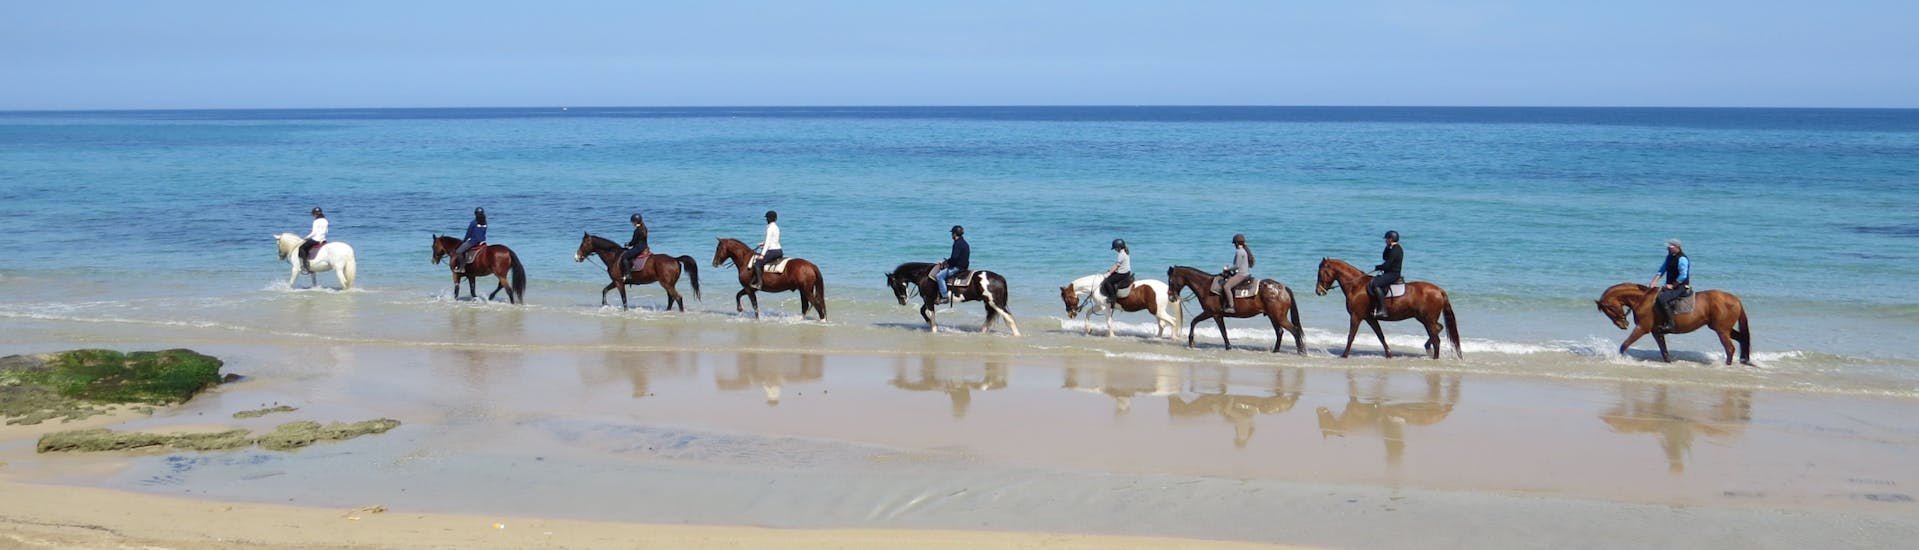 Group of horses riding on the beach during the Horseback Riding Tour in the Coastal Dunes Natural Park with Pugliamare.